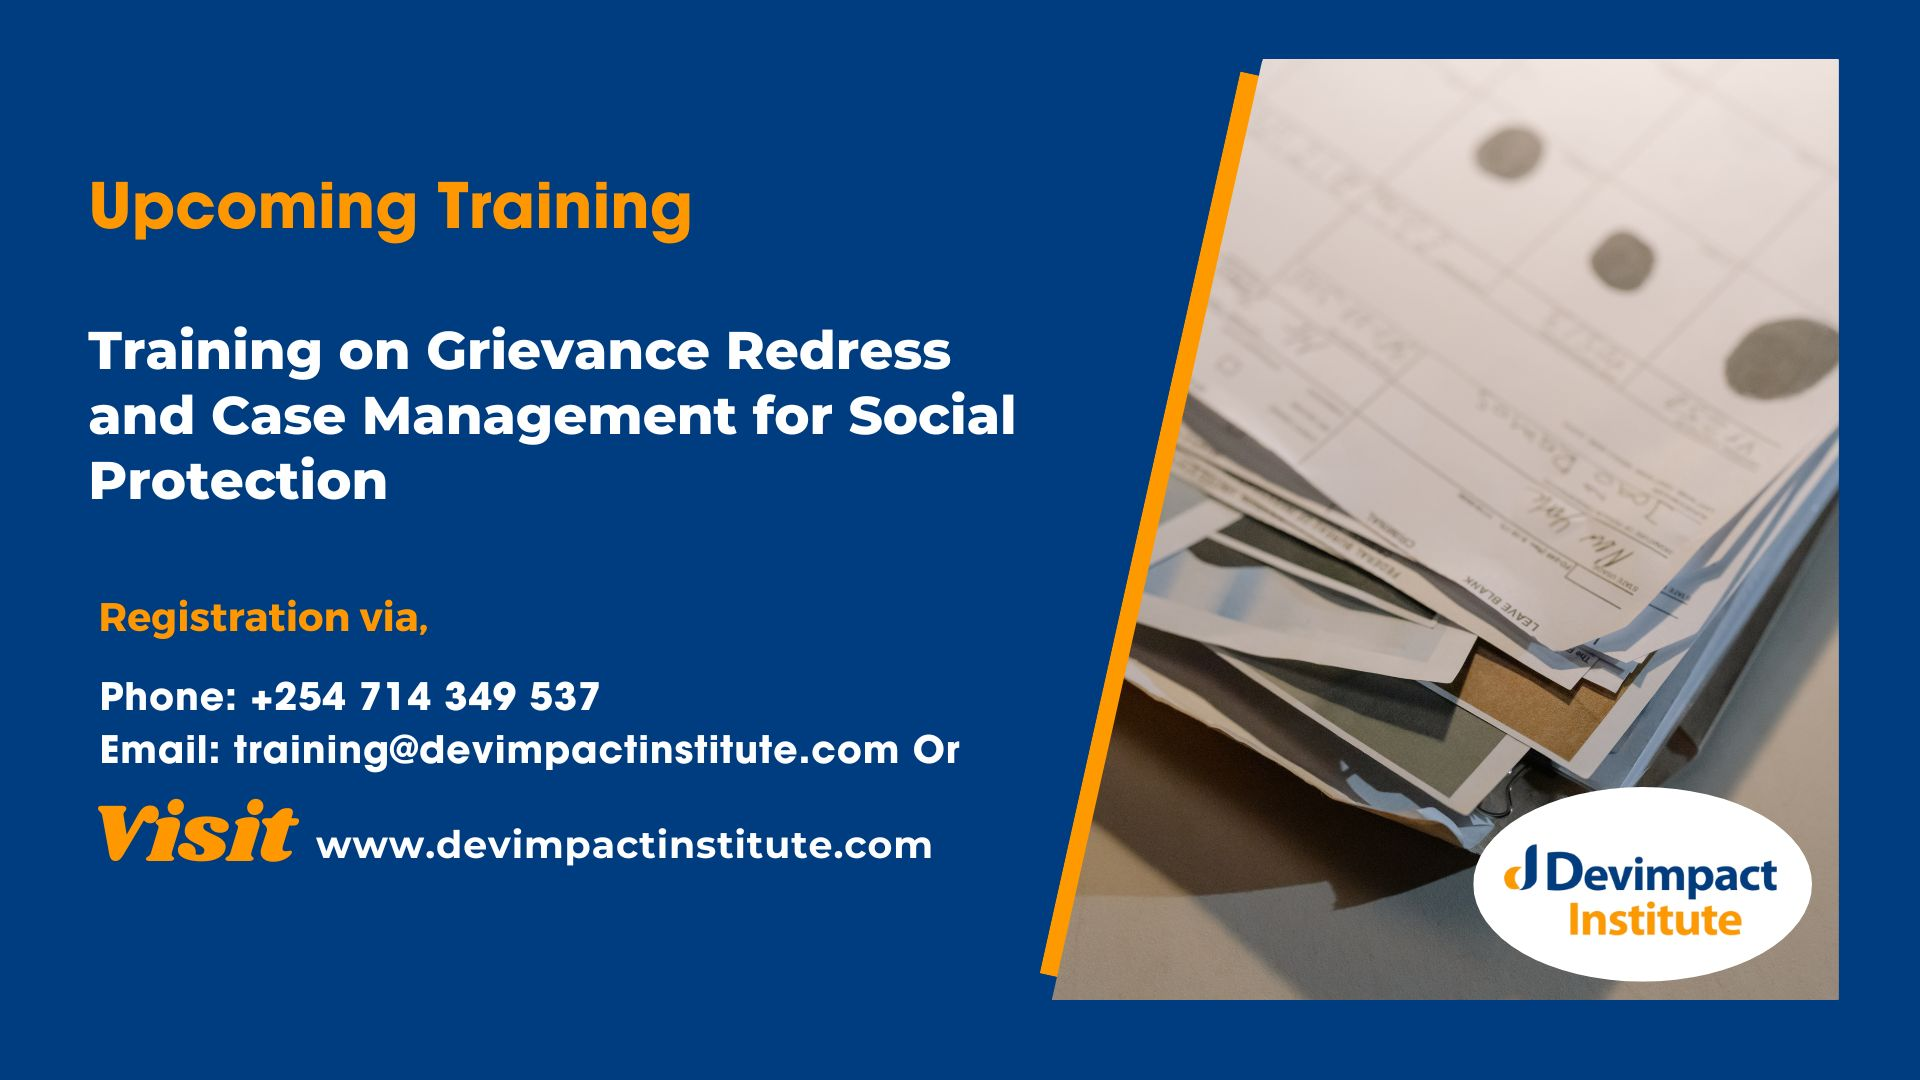 Training on Grievance Redress and Case Management for Social Protection, Devimpact Institute, Nairobi, Kenya